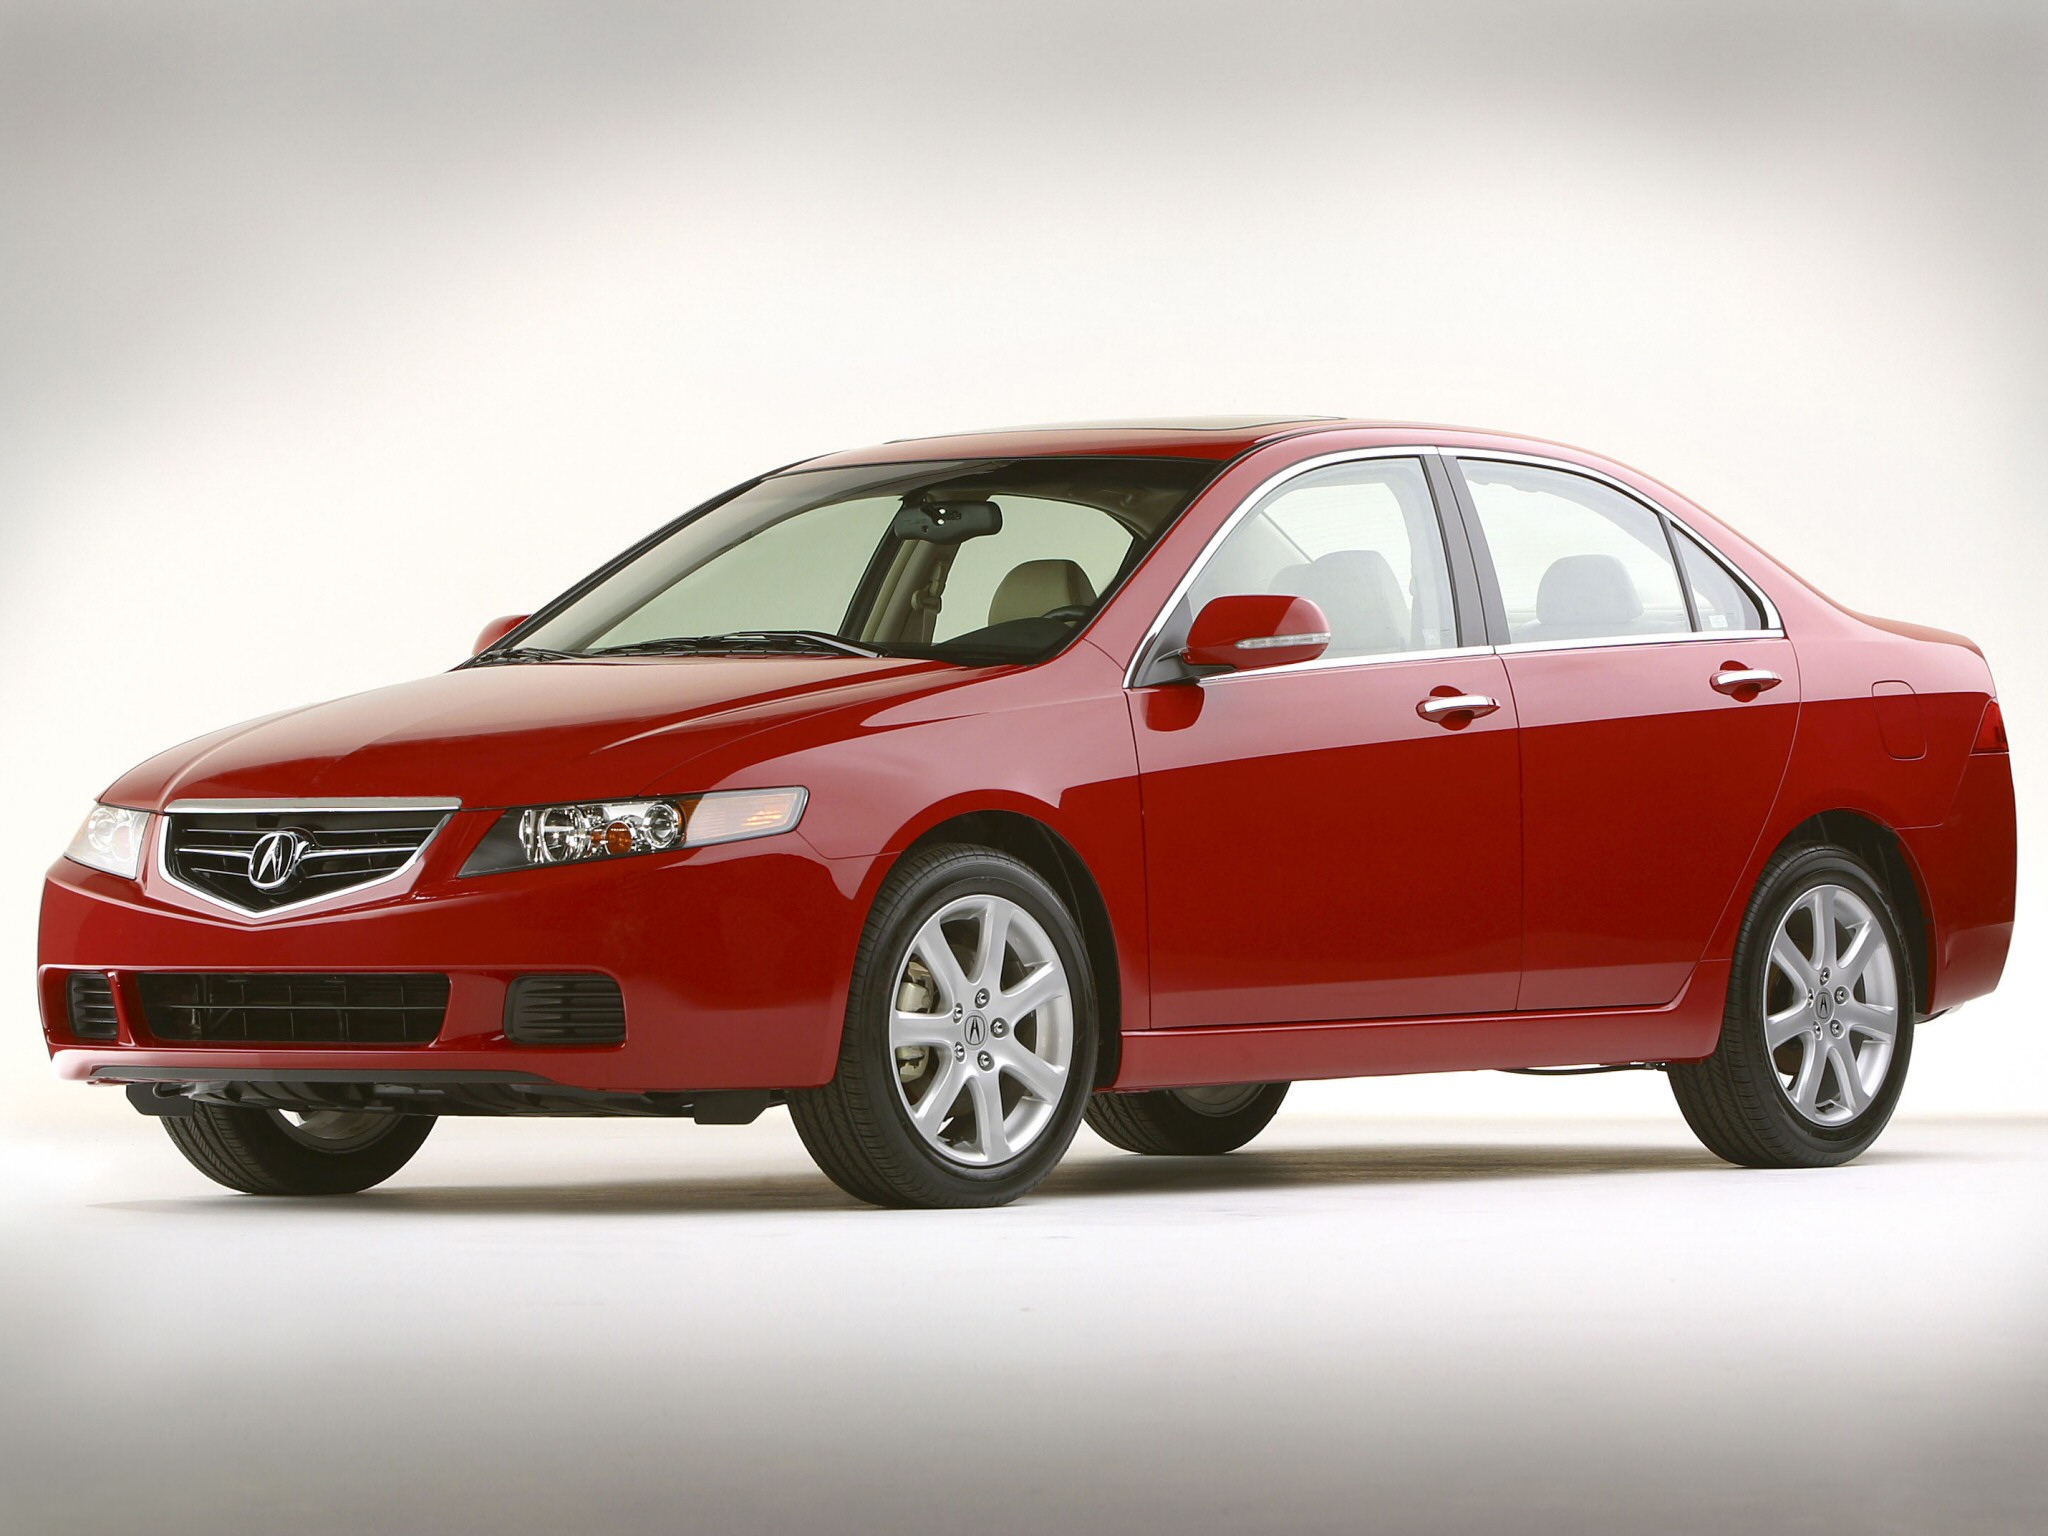 Free HD auto, acura, cars, red, side view, style, akura, 2003, tsx